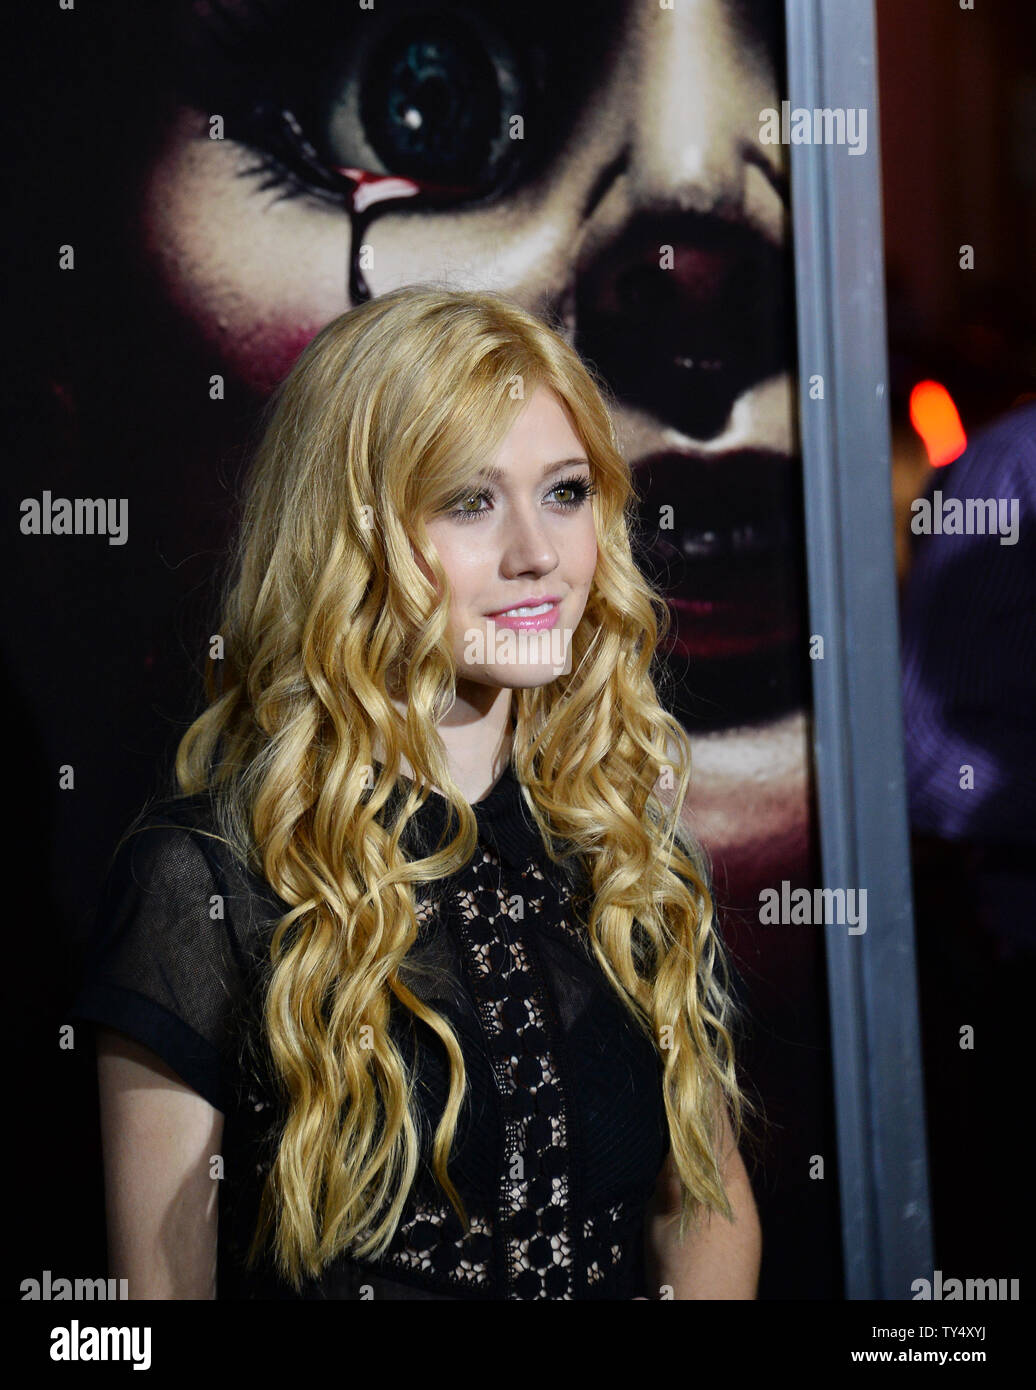 Actress Katherine McNamara attends the premiere of the horror film 'Annabelle' at TCL Chinese Theatre in the Hollywood section of Los Angeles on September 29, 2014. Storyline: A couple begin to experience terrifying supernatural occurrences involving a vintage doll shortly after their home is invaded by satanic cultists.  UPI/Jim Ruymen Stock Photo